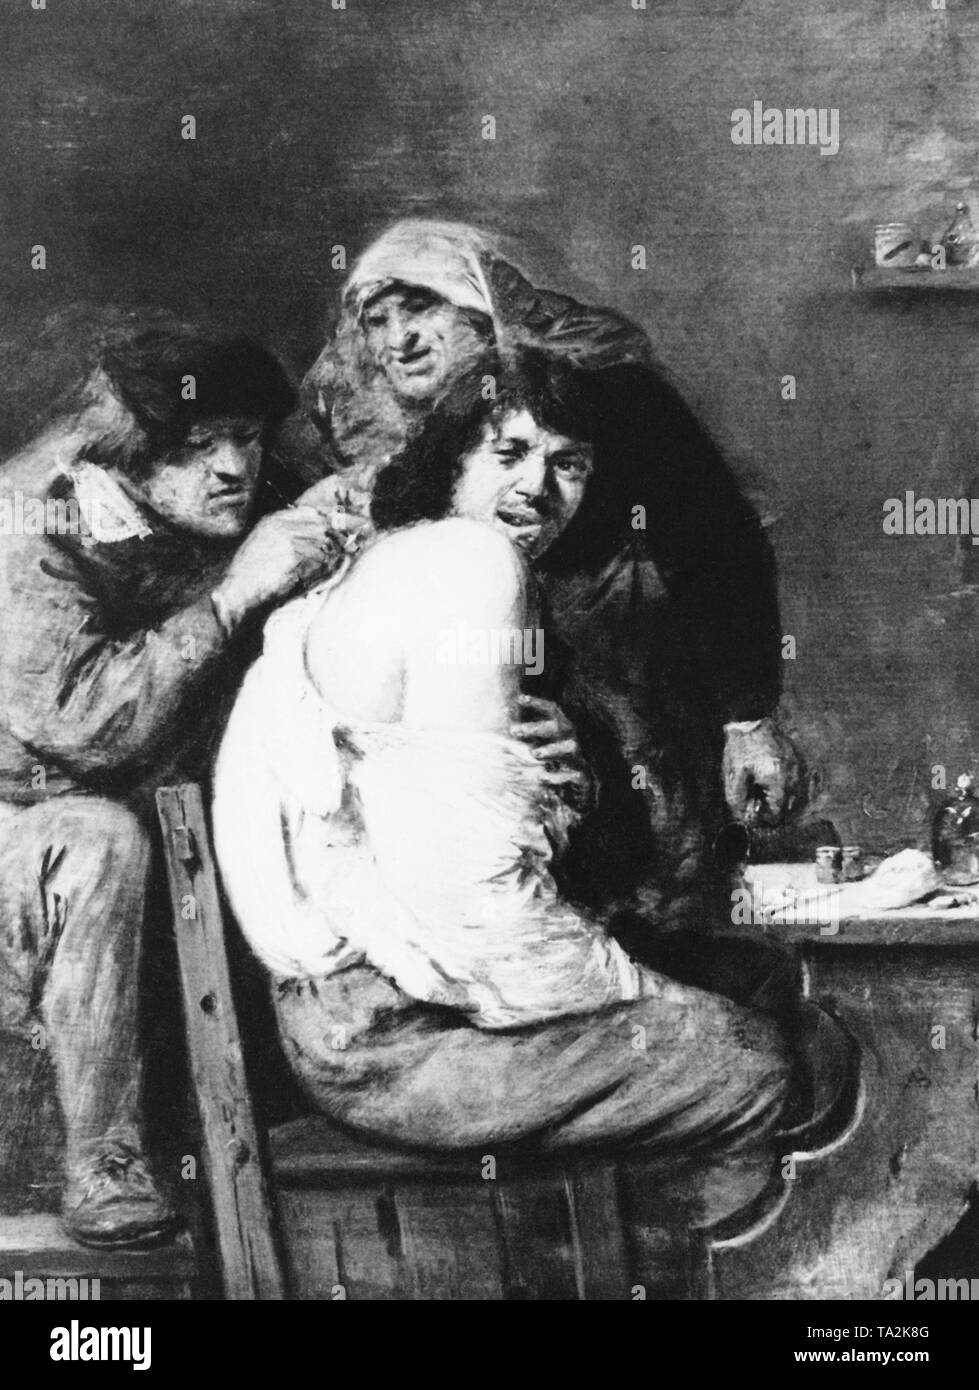 A barber surgeon operates a patient on his back in a tavern. The painting was painted by Flemish painter Adriaen Brouwer. Stock Photo